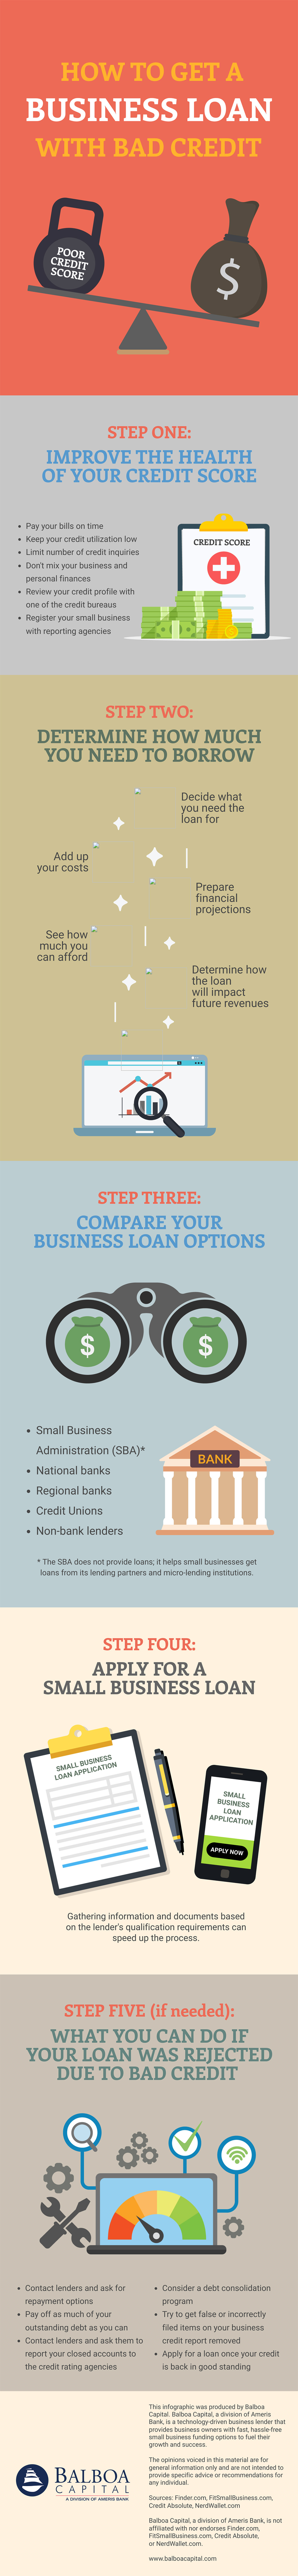 Bad Credit Business Loans Infographic